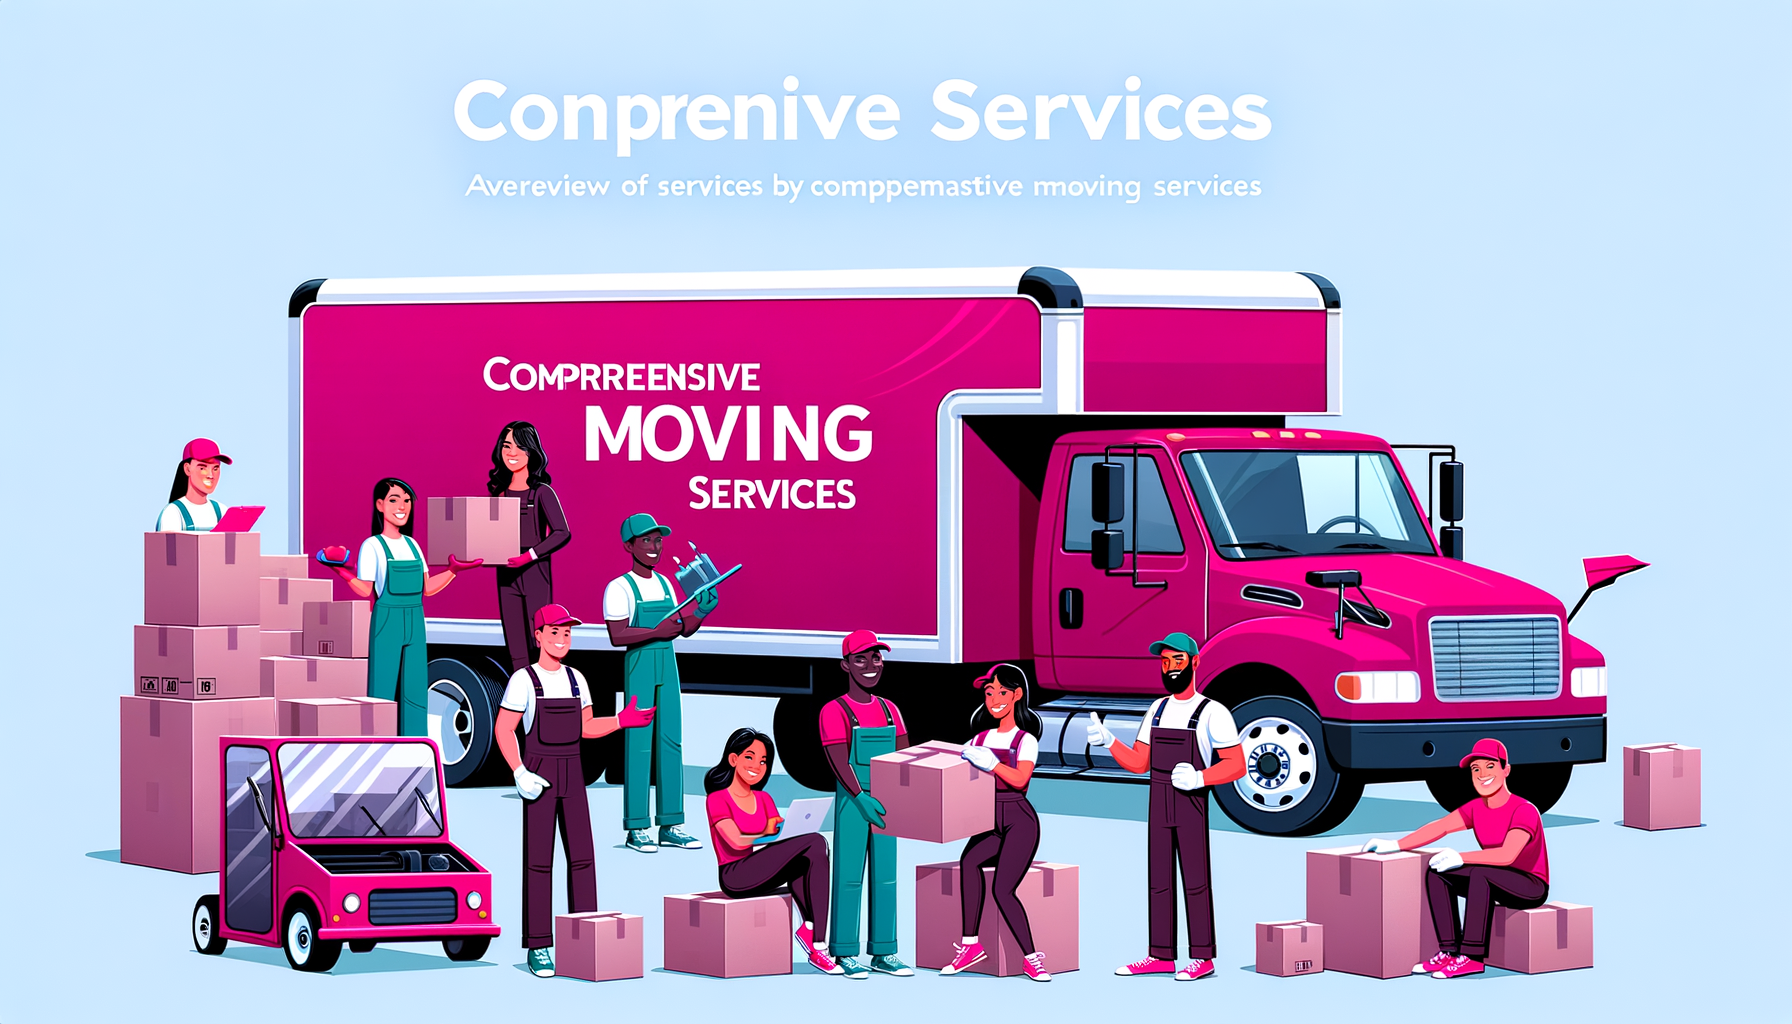 Cartoon-like illustration of fuschia-colored moving truck and movers showcasing the variety of services offered by North American Moving Services, including packing, loading, and transportation.